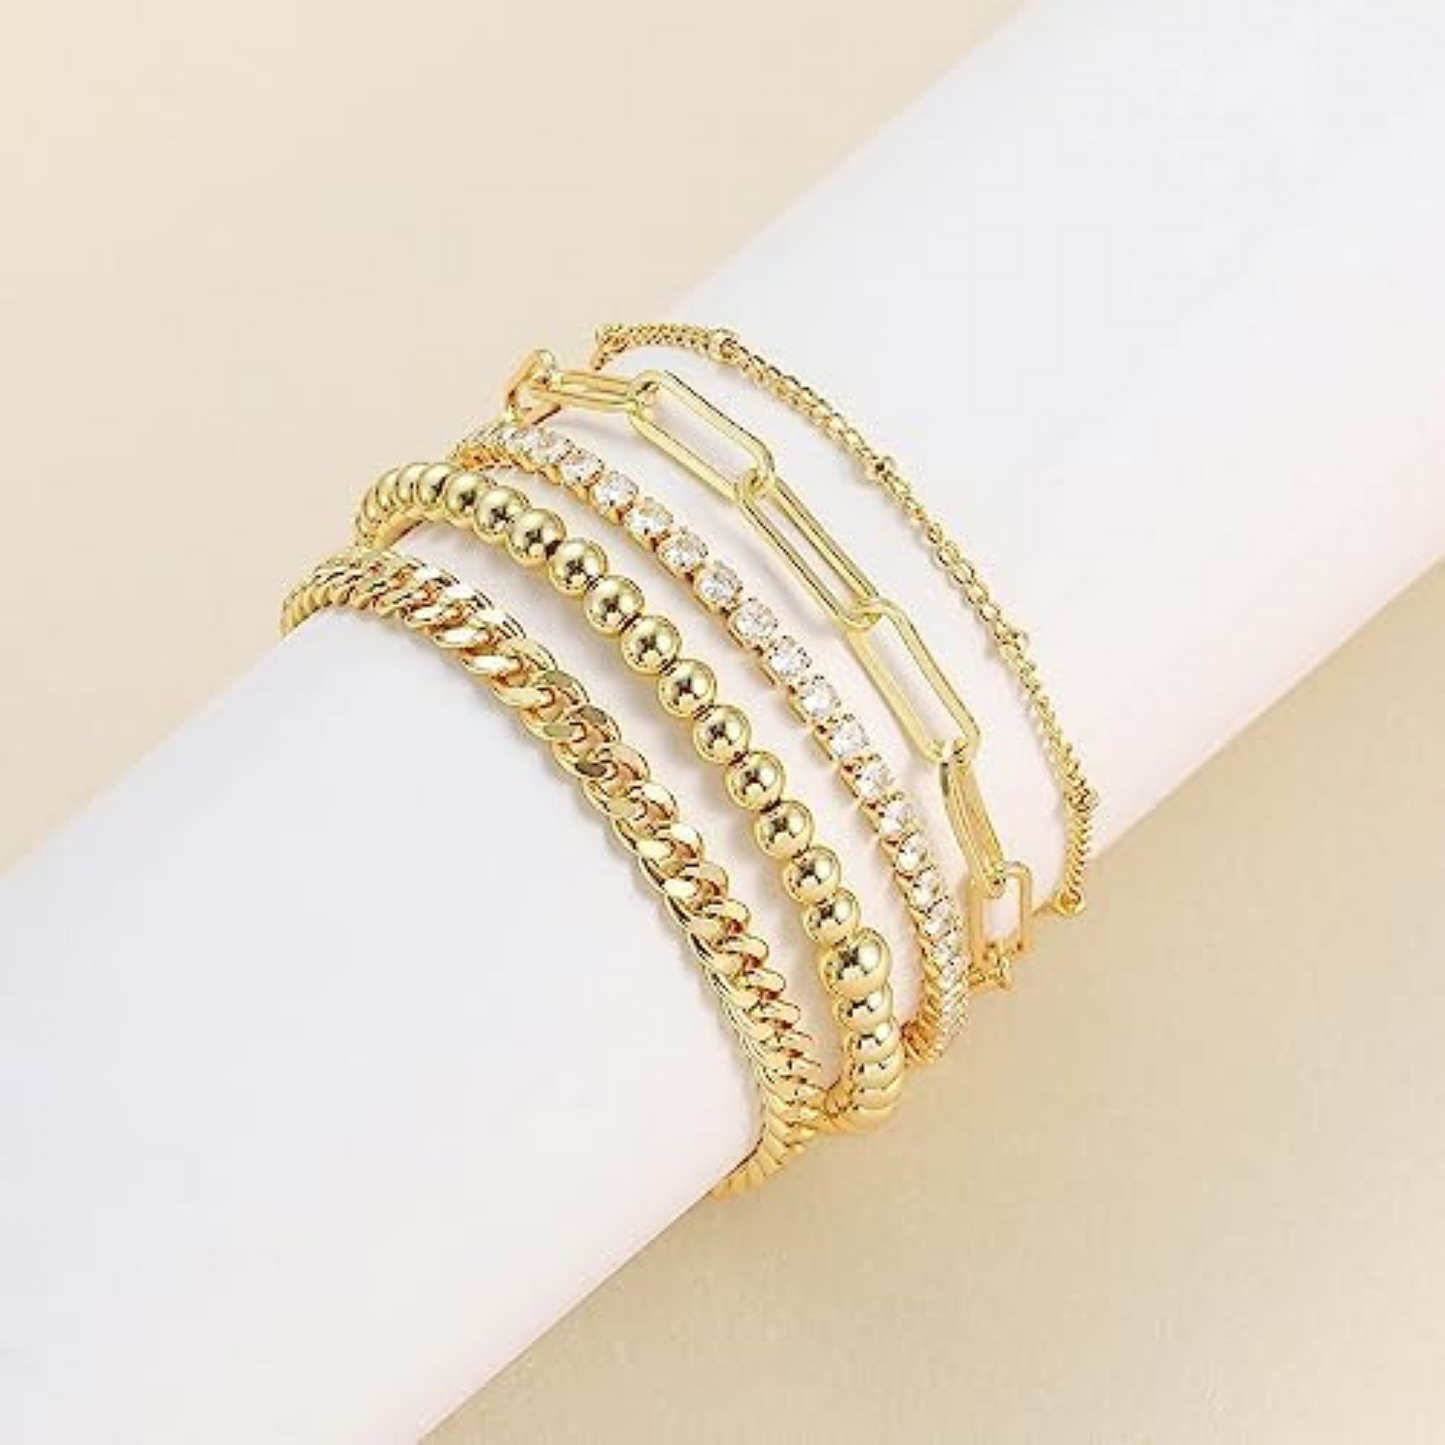 14K Gold Filled Bracelet Sets: Tennis, Cuban LInk,Beaded,Paperclip- Boxed Gifts